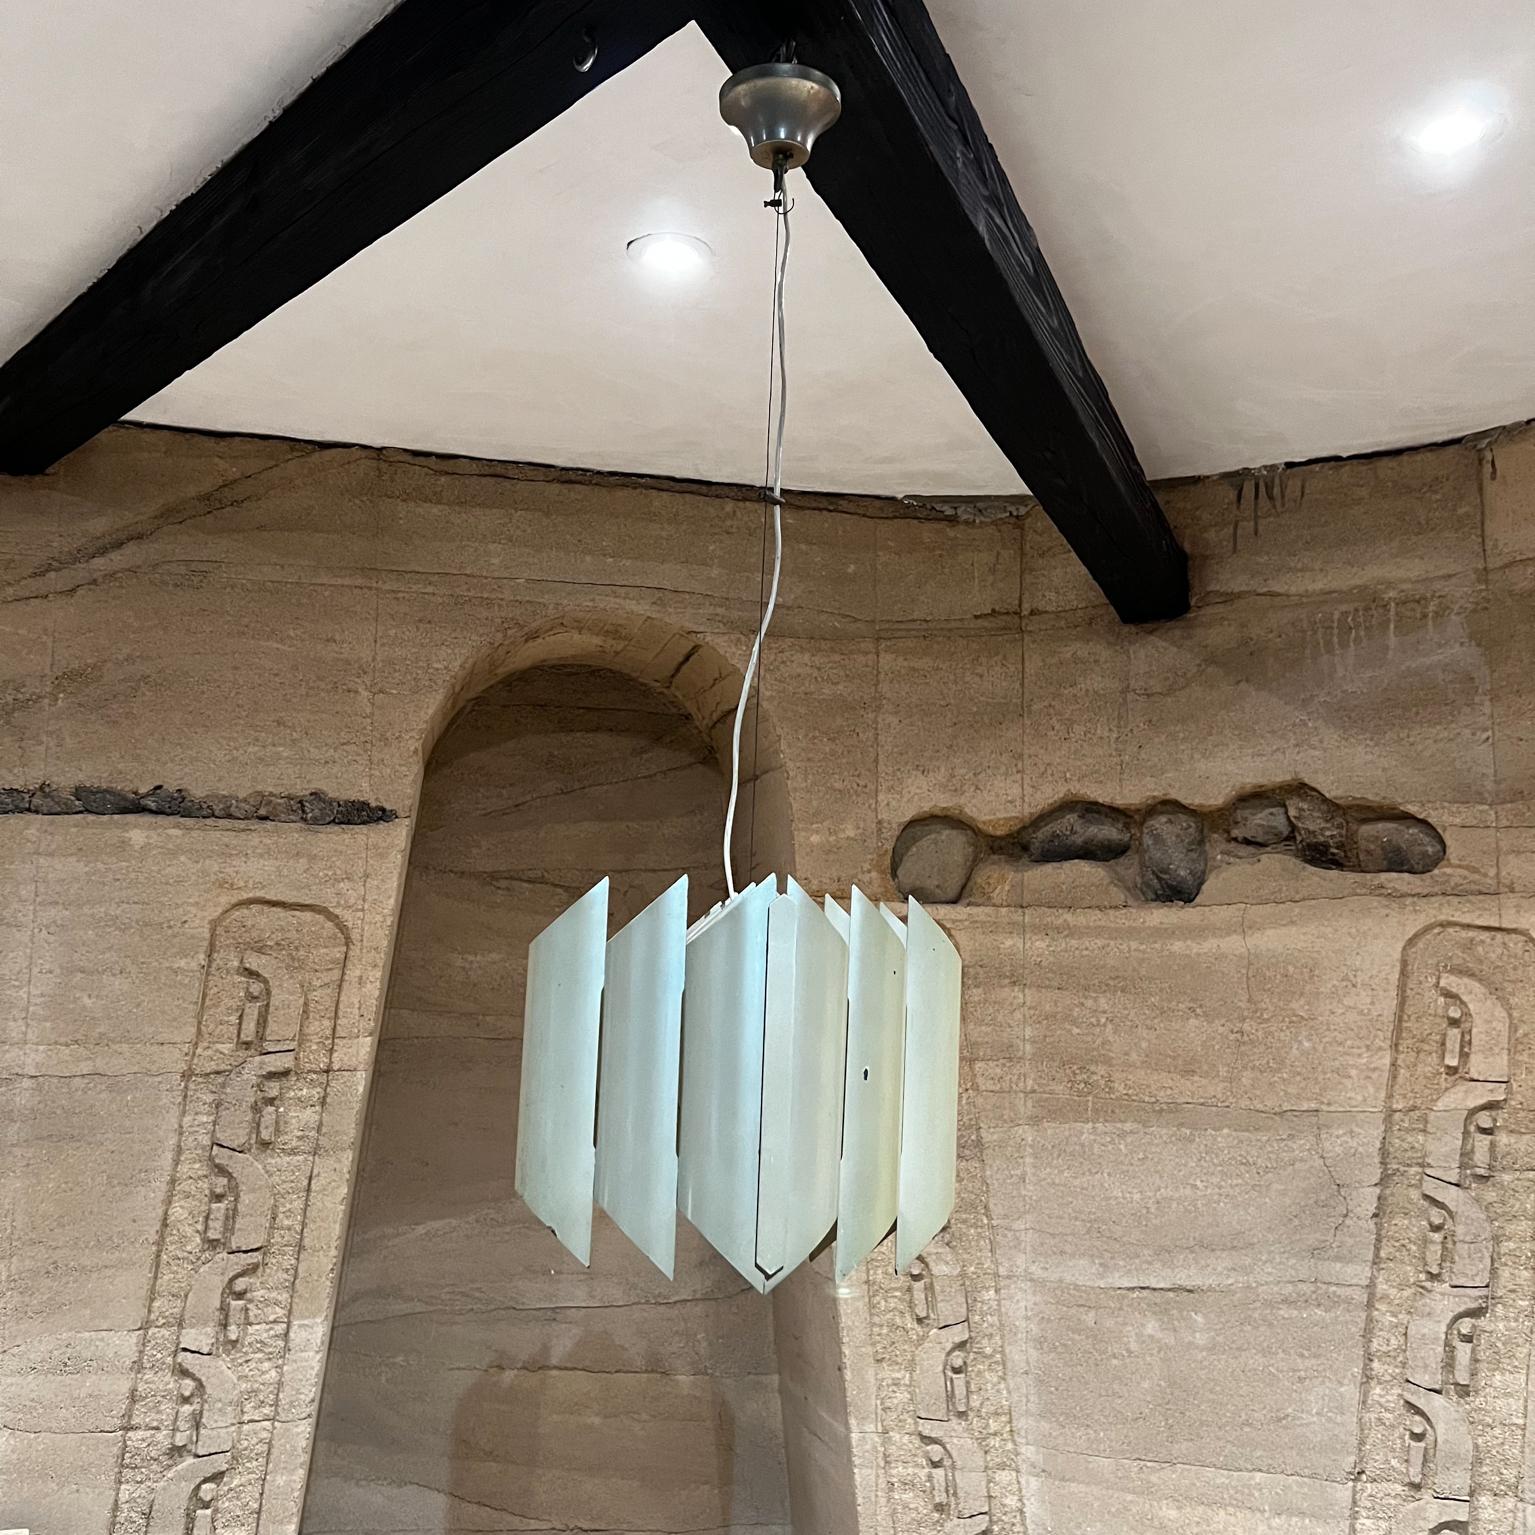 1970s, Tube cathedral chandelier pendant by Robert Sonneman.
Modern sheets of mother-of-pearl metal form tubes on this sculptural modern art chandelier.
Unmarked.
Measures: 38 tall x 10 x 10, fixture only 11 tall
Unrestored original vintage